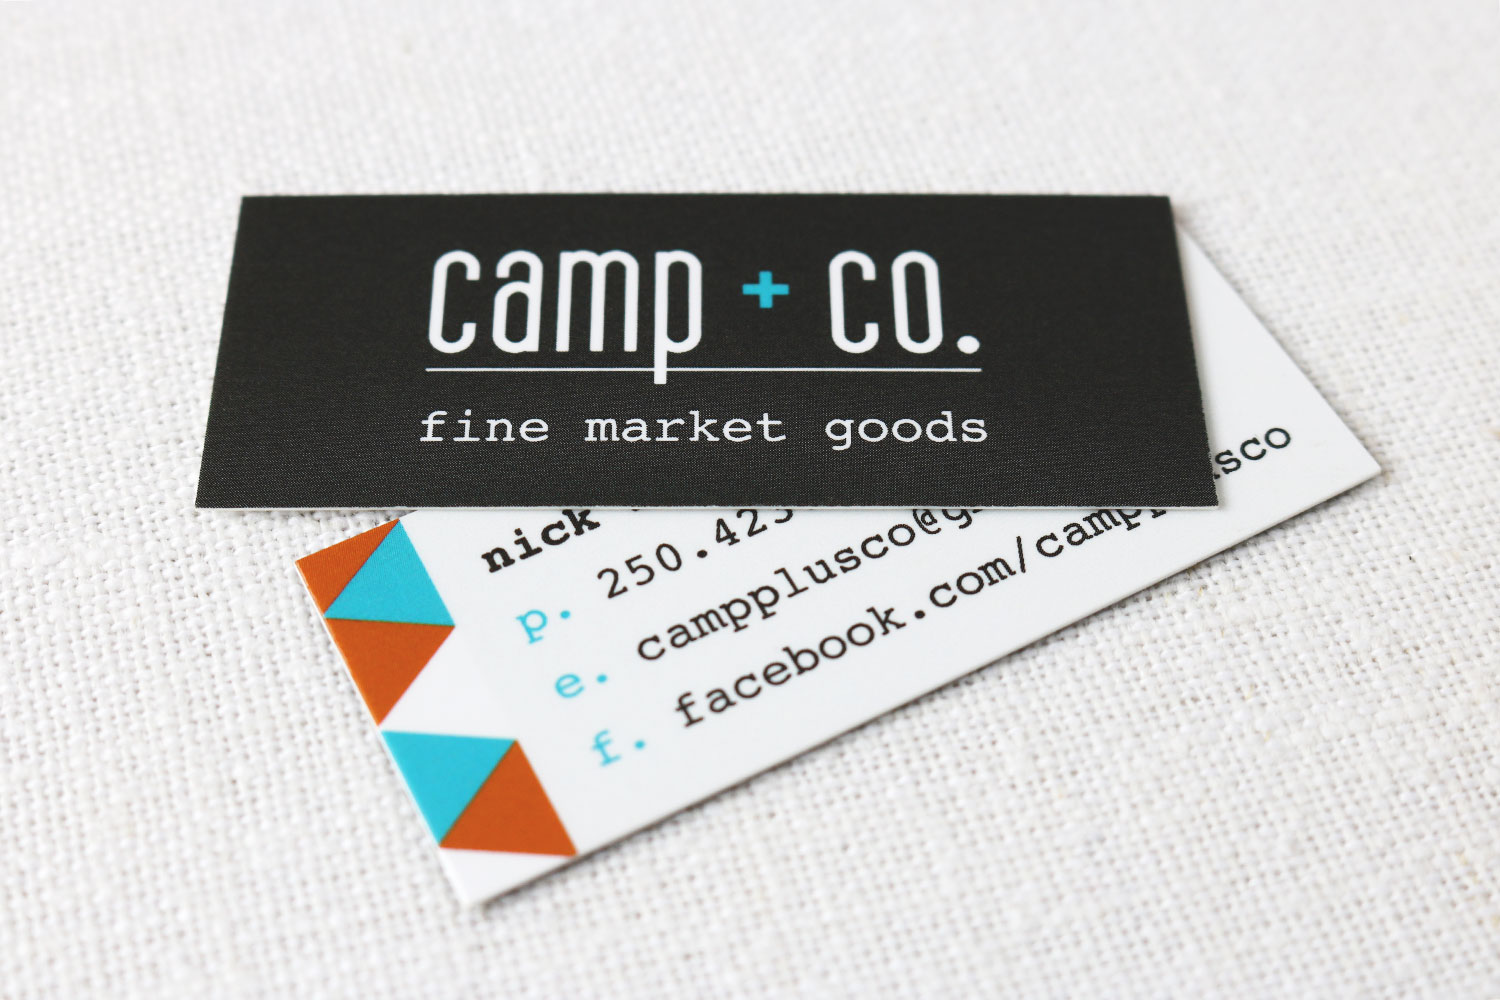 Camp + Co. Business Cards